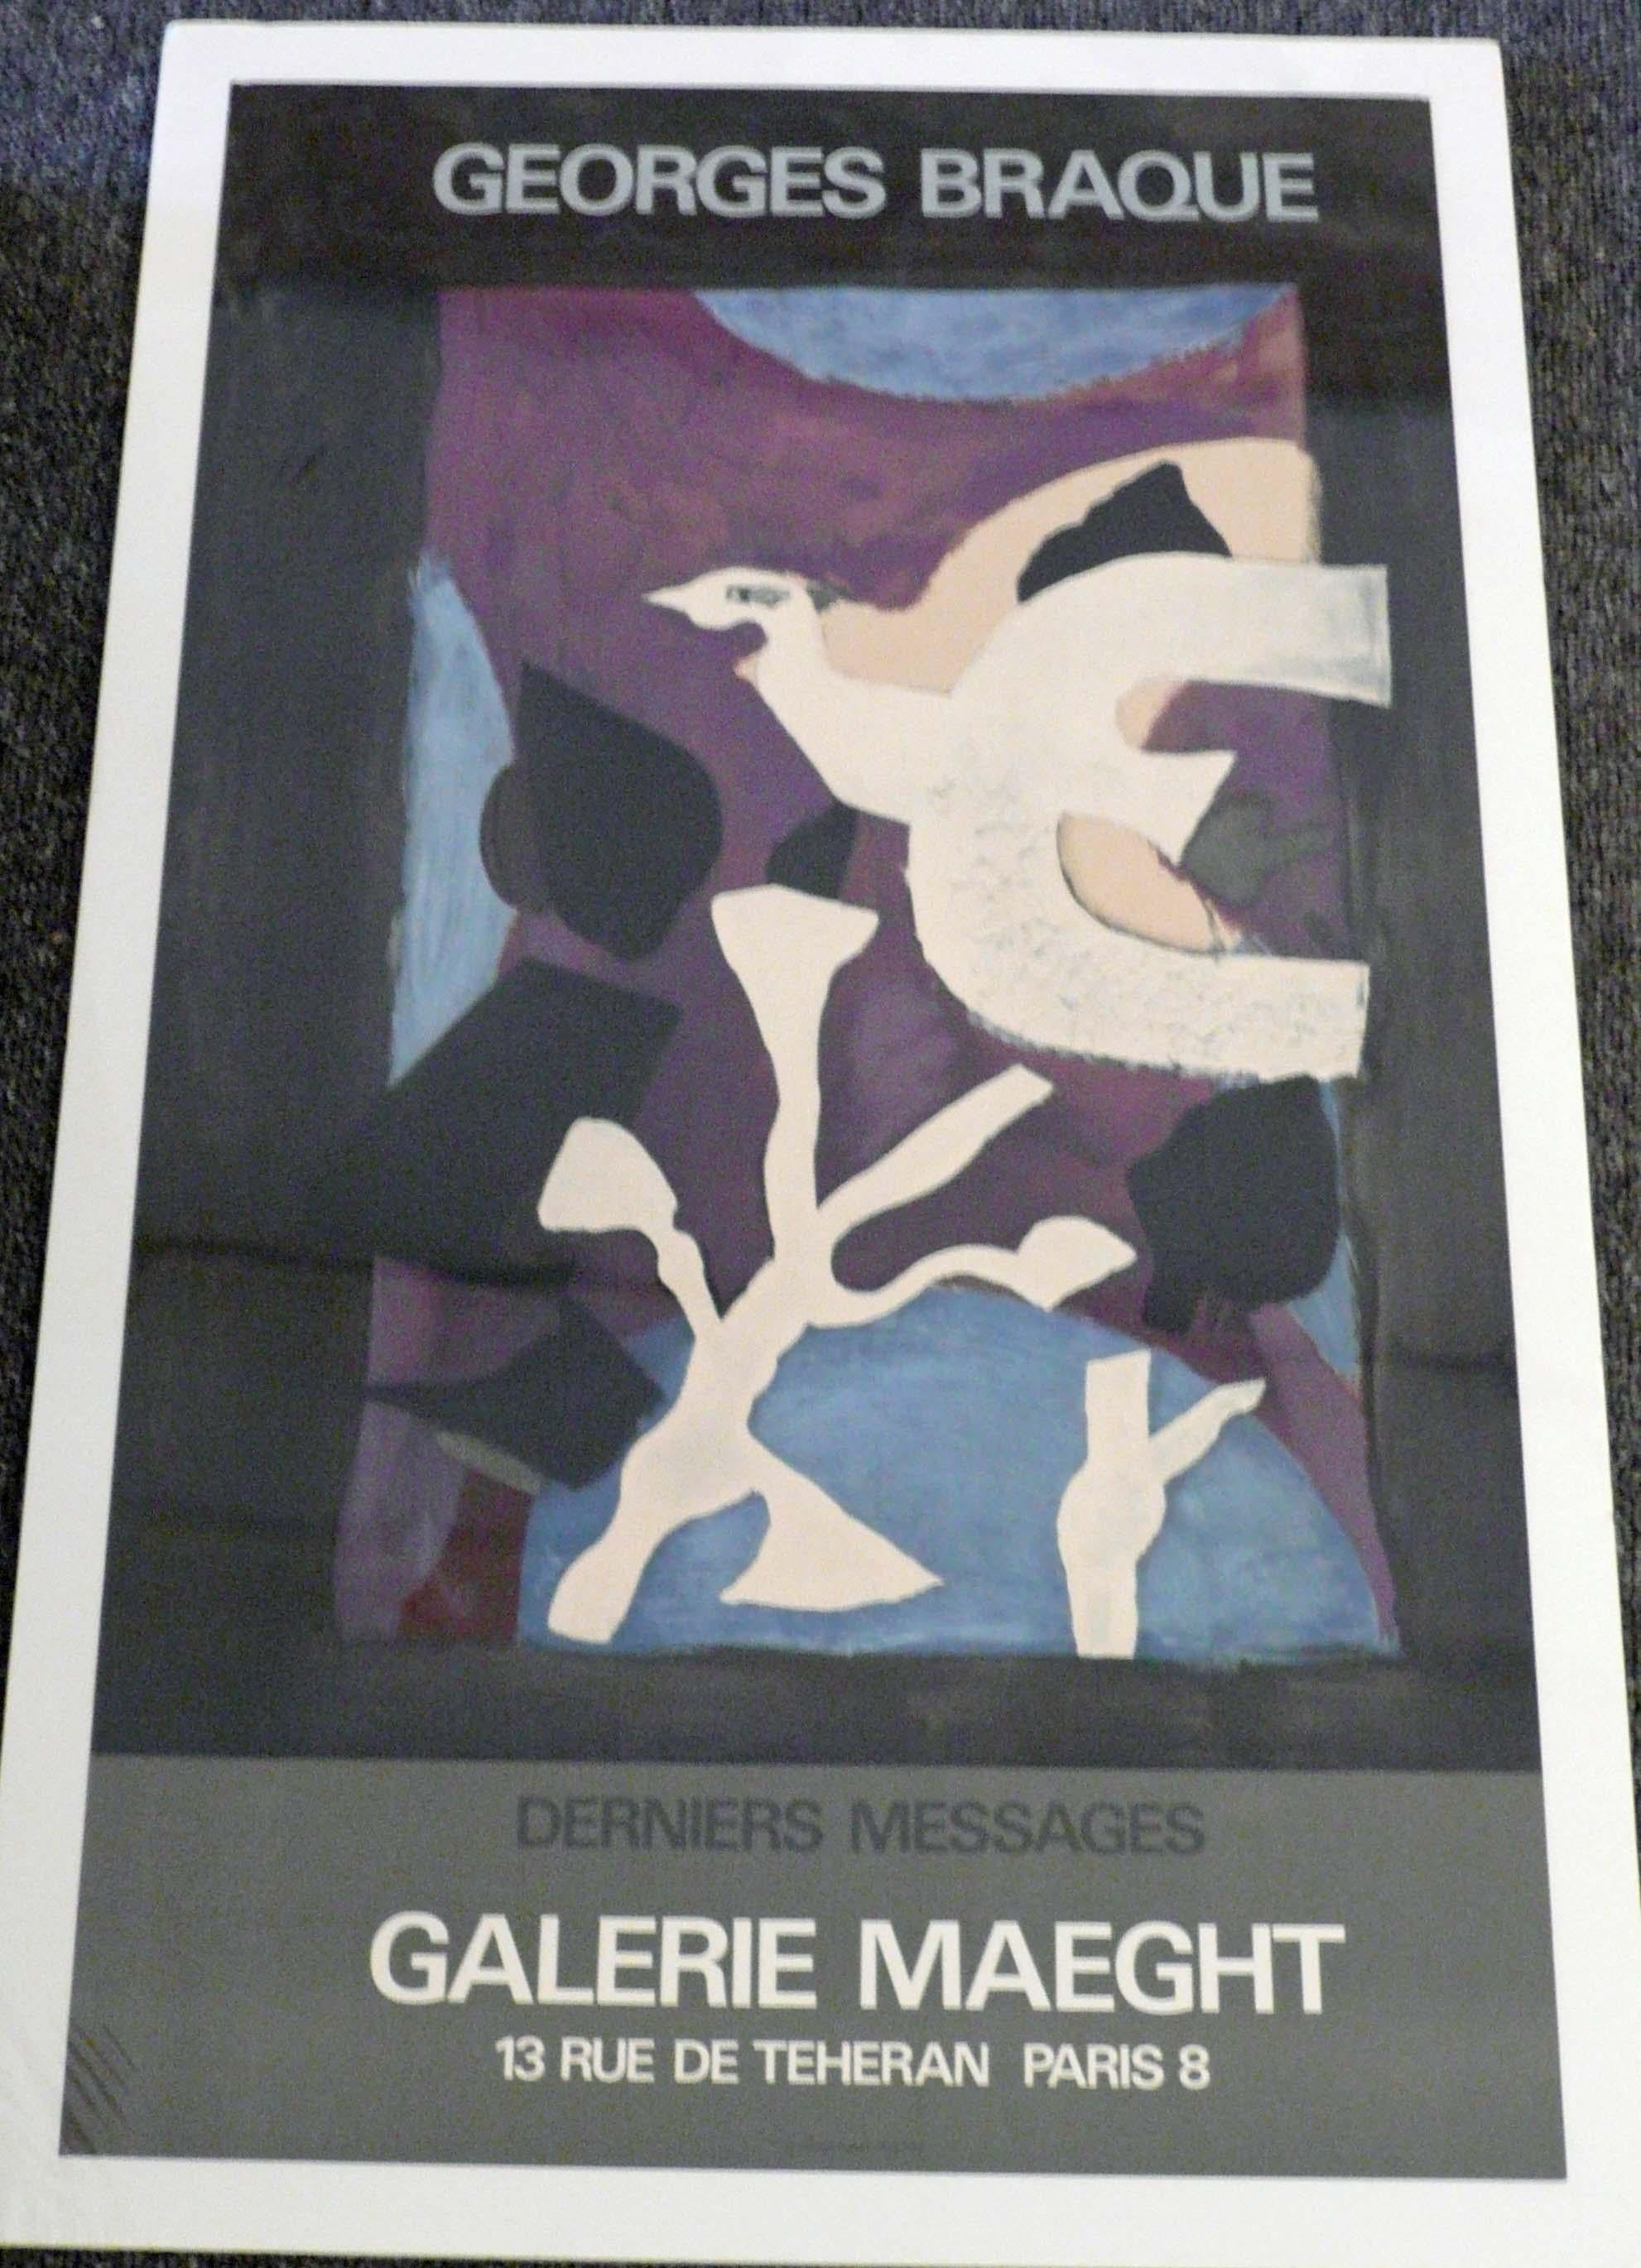 Georges Braque Abstract Print - DERNIERES MESSAGES - GALERIE MAEGHT POSTER